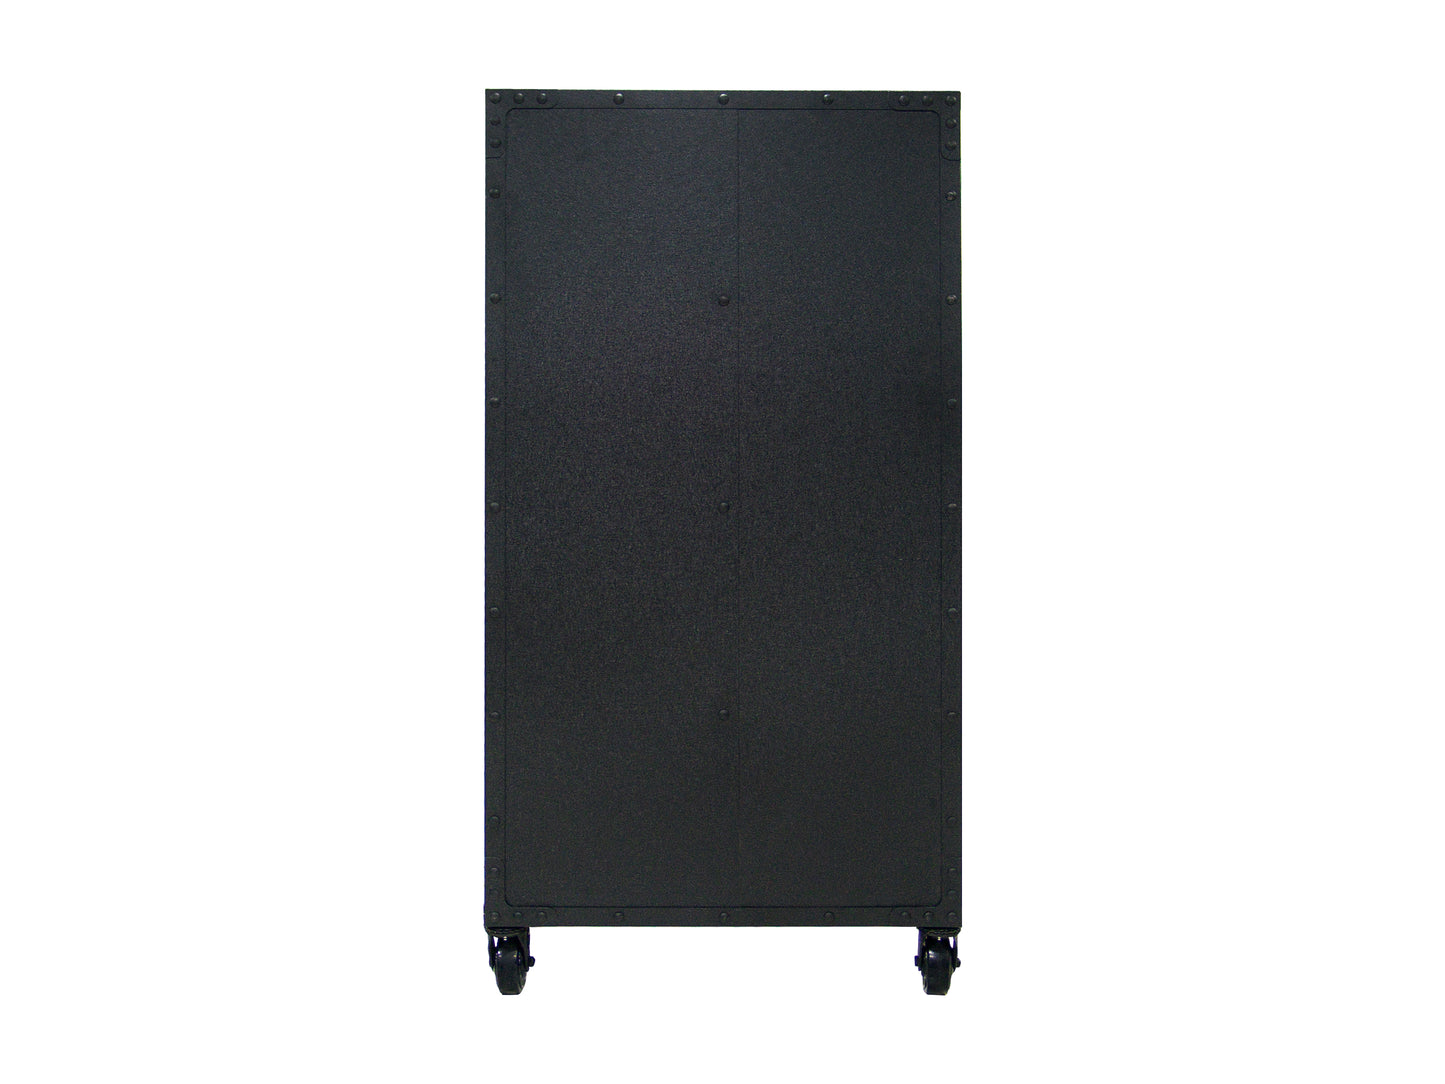 Duramax 36 In. W x 72In. H Industrial Free Standing Cabinet with Wheels